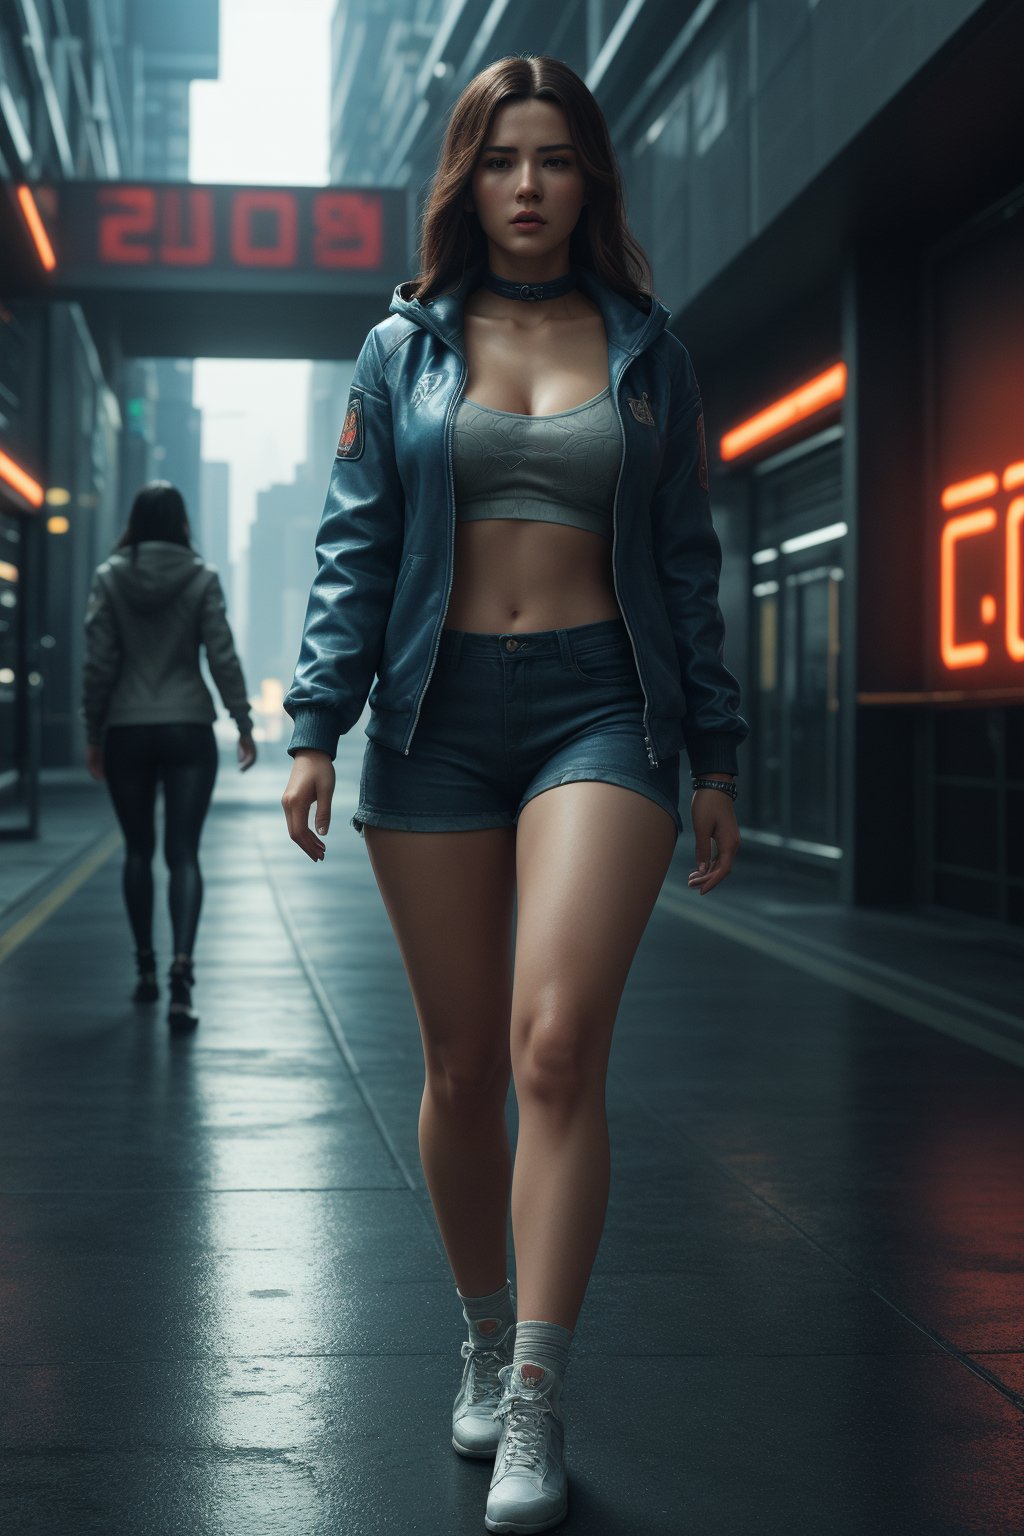 In a cyberpunk City a beautiful Asian woman walking,  hot pan and hoodie jacket hourglass body, she's looking so hot and looking at viewers, ultra realistic environment, futuristic scenario, year 3000, more details, neon light lines on her dress, futuristic cyber gadget on her body, a big scientific smartwatch on her wrist, neon light glowing choker,Tamil girl